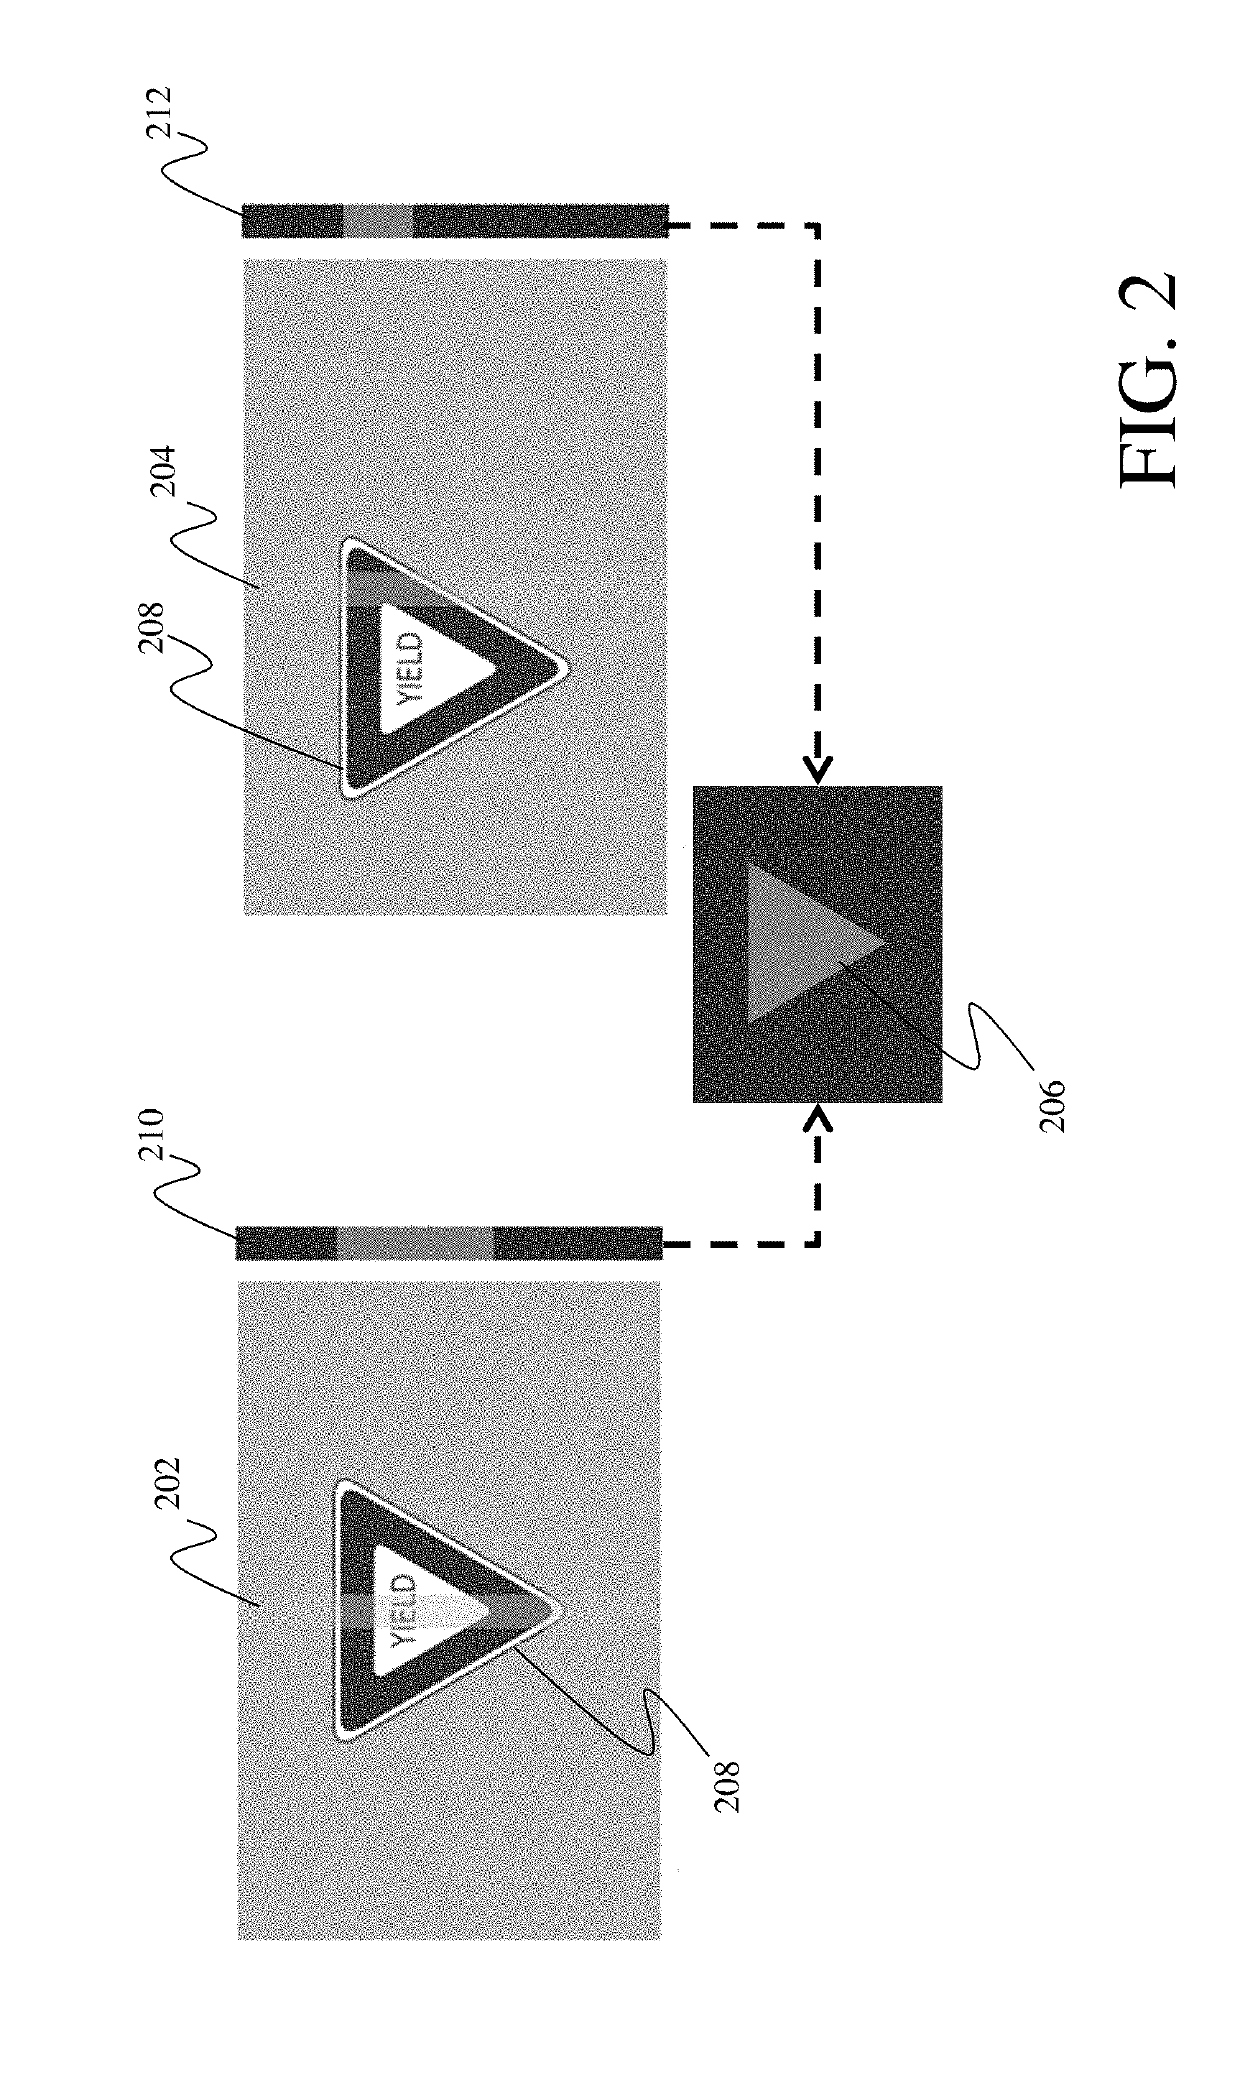 Optical system for object detection and location